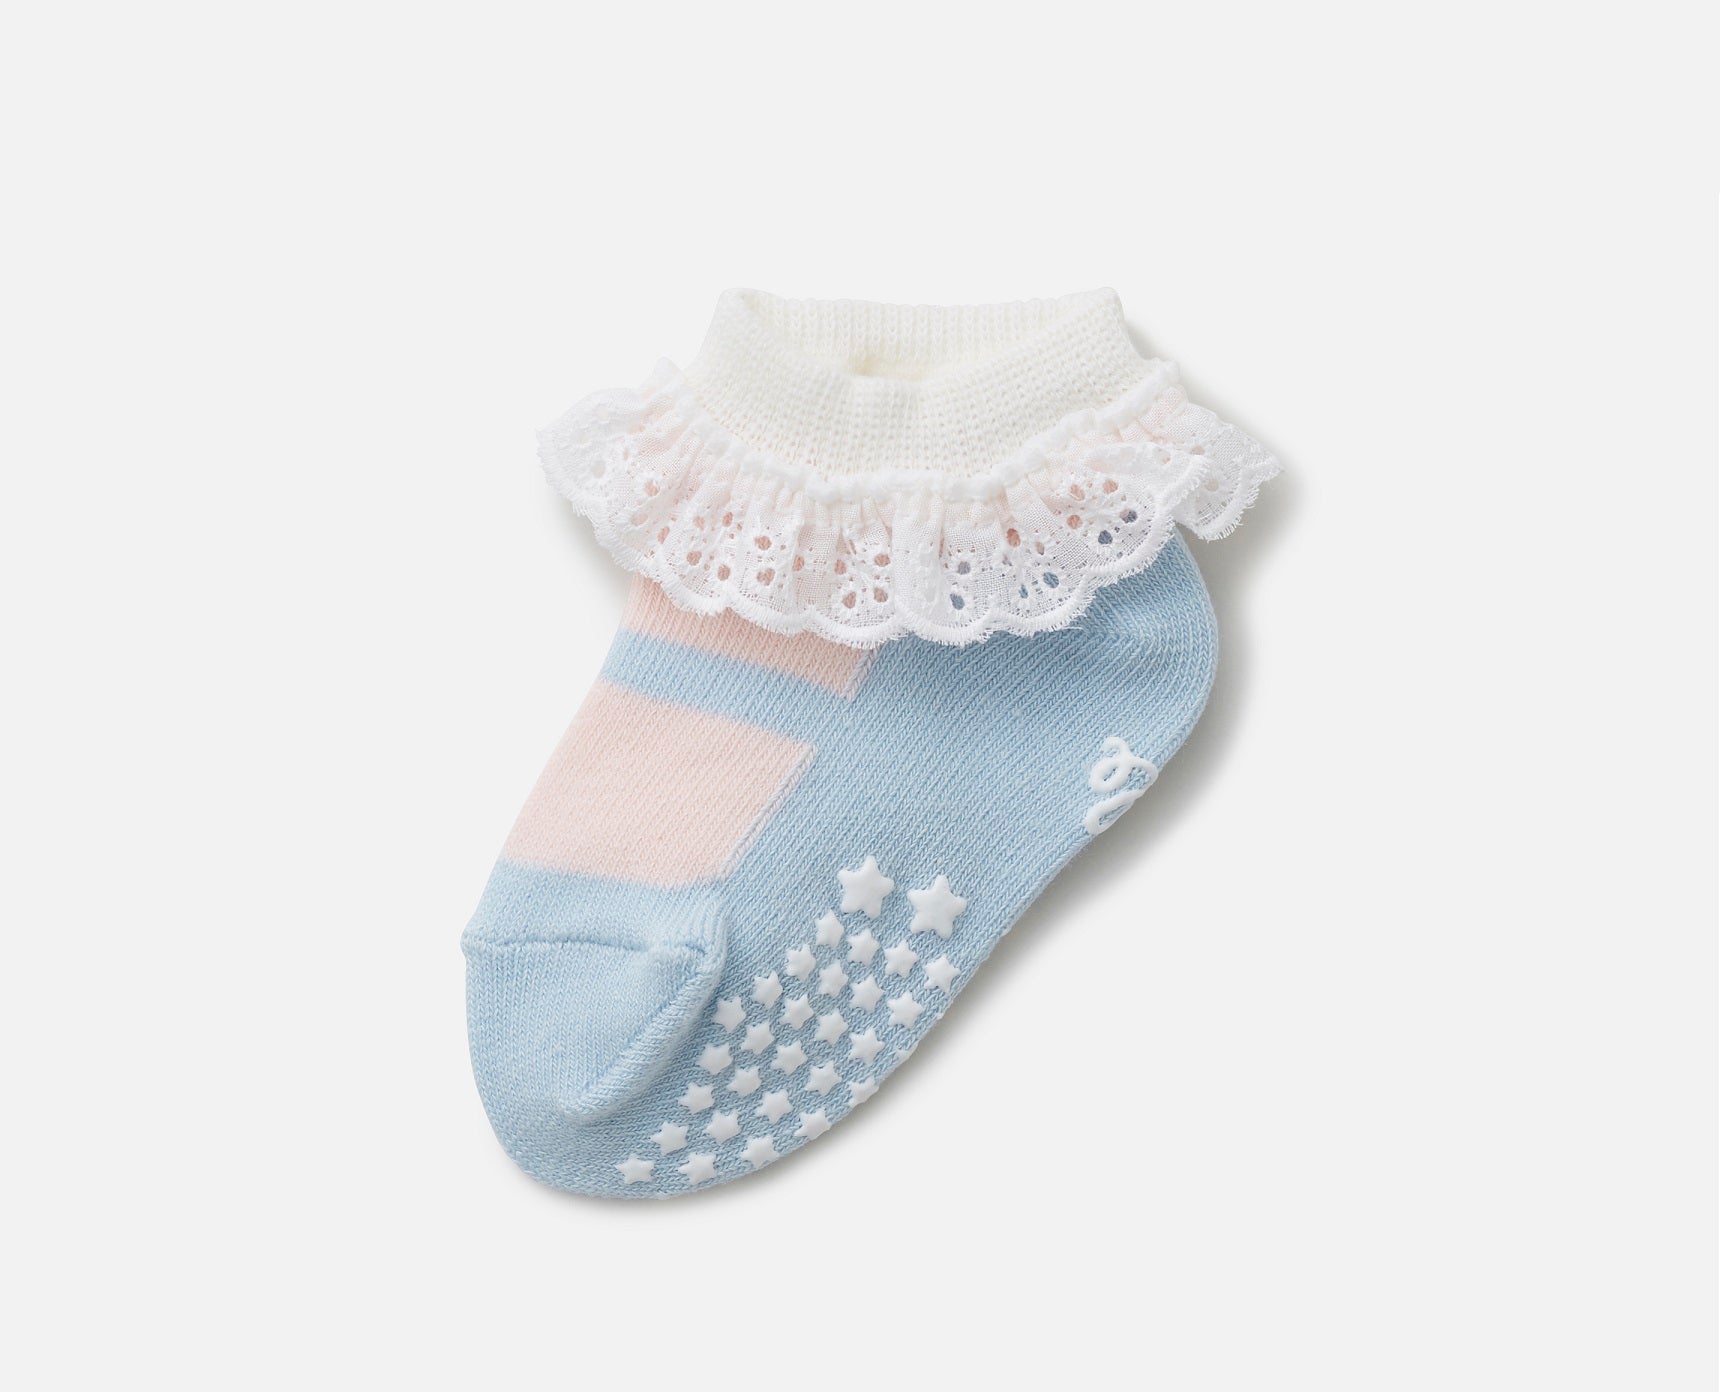 Blue Baby Socks with Frill Made in Cotton by Tabio Japan